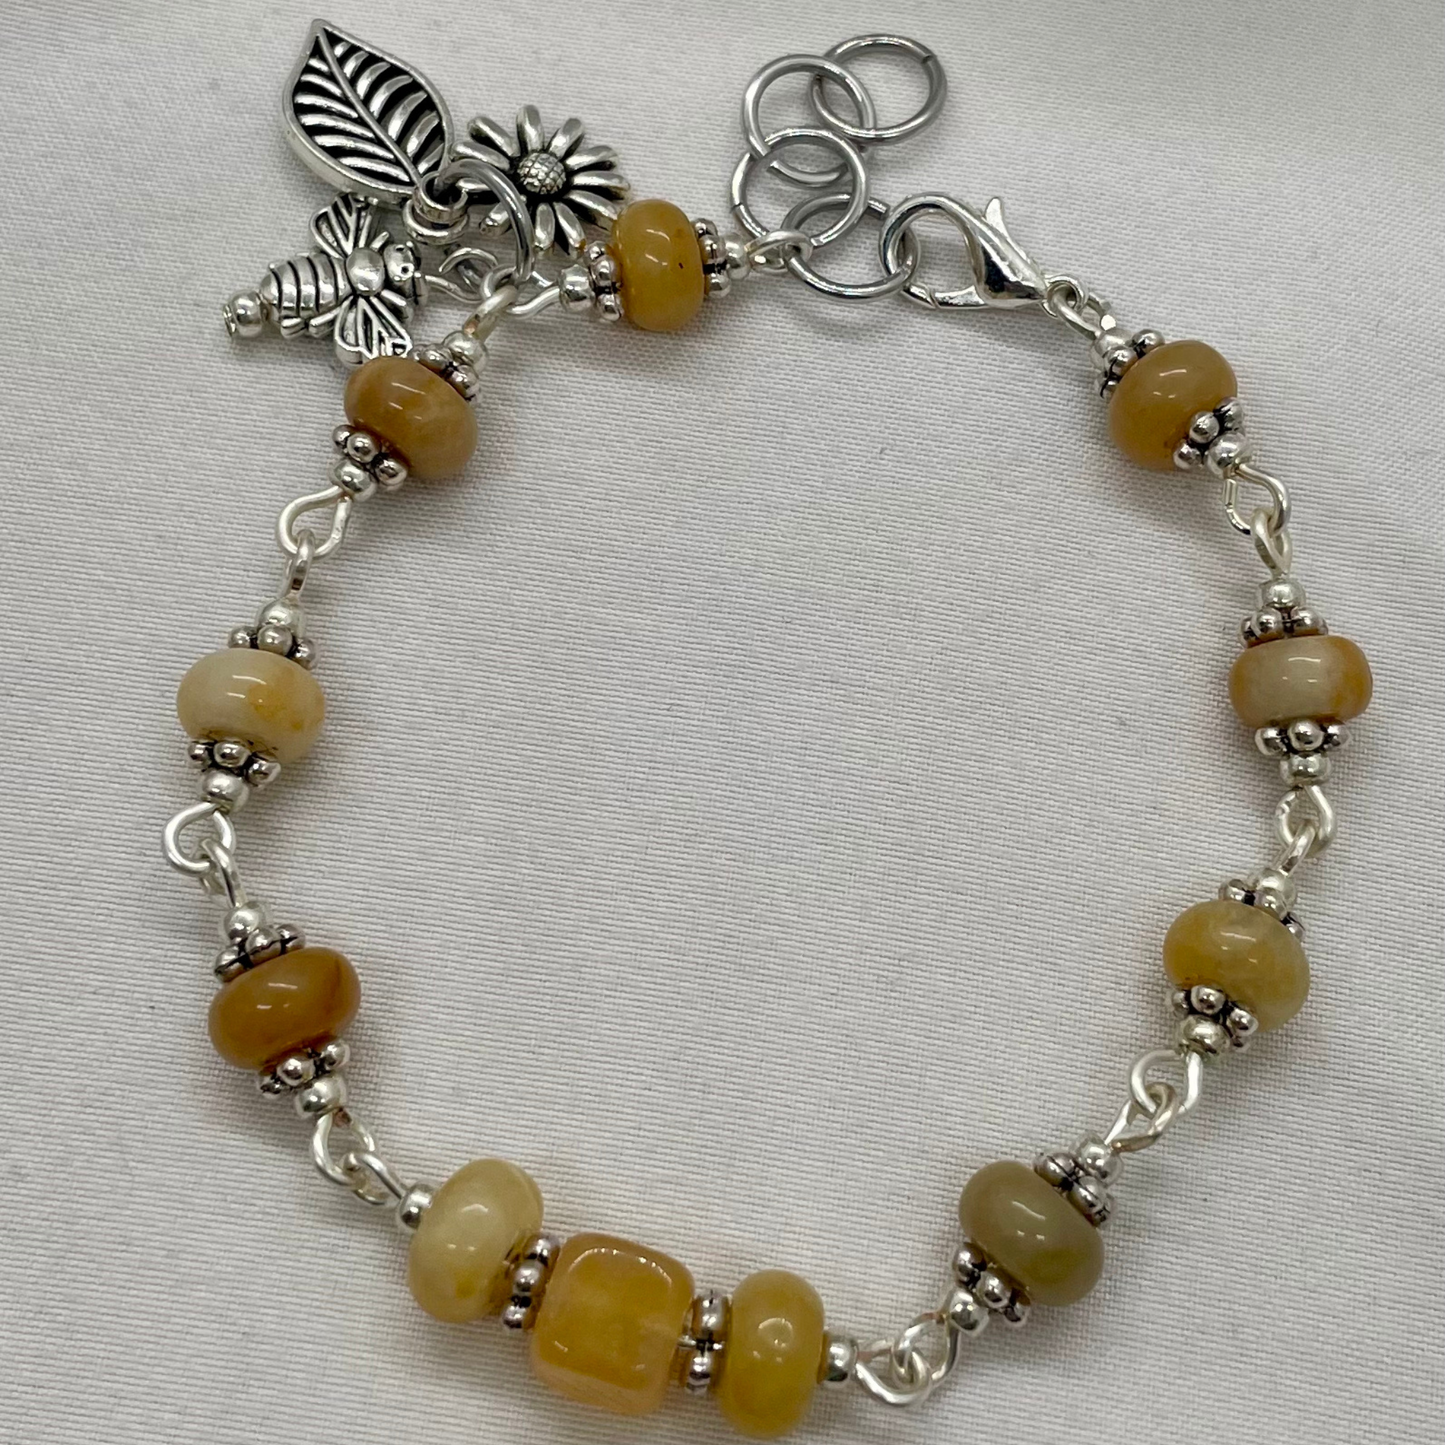 Honey Sunshine Citrine Bracelet: Artisan Crafted with czech glass and citrine beads for Prosperity and Positivity | summer gift | bee love